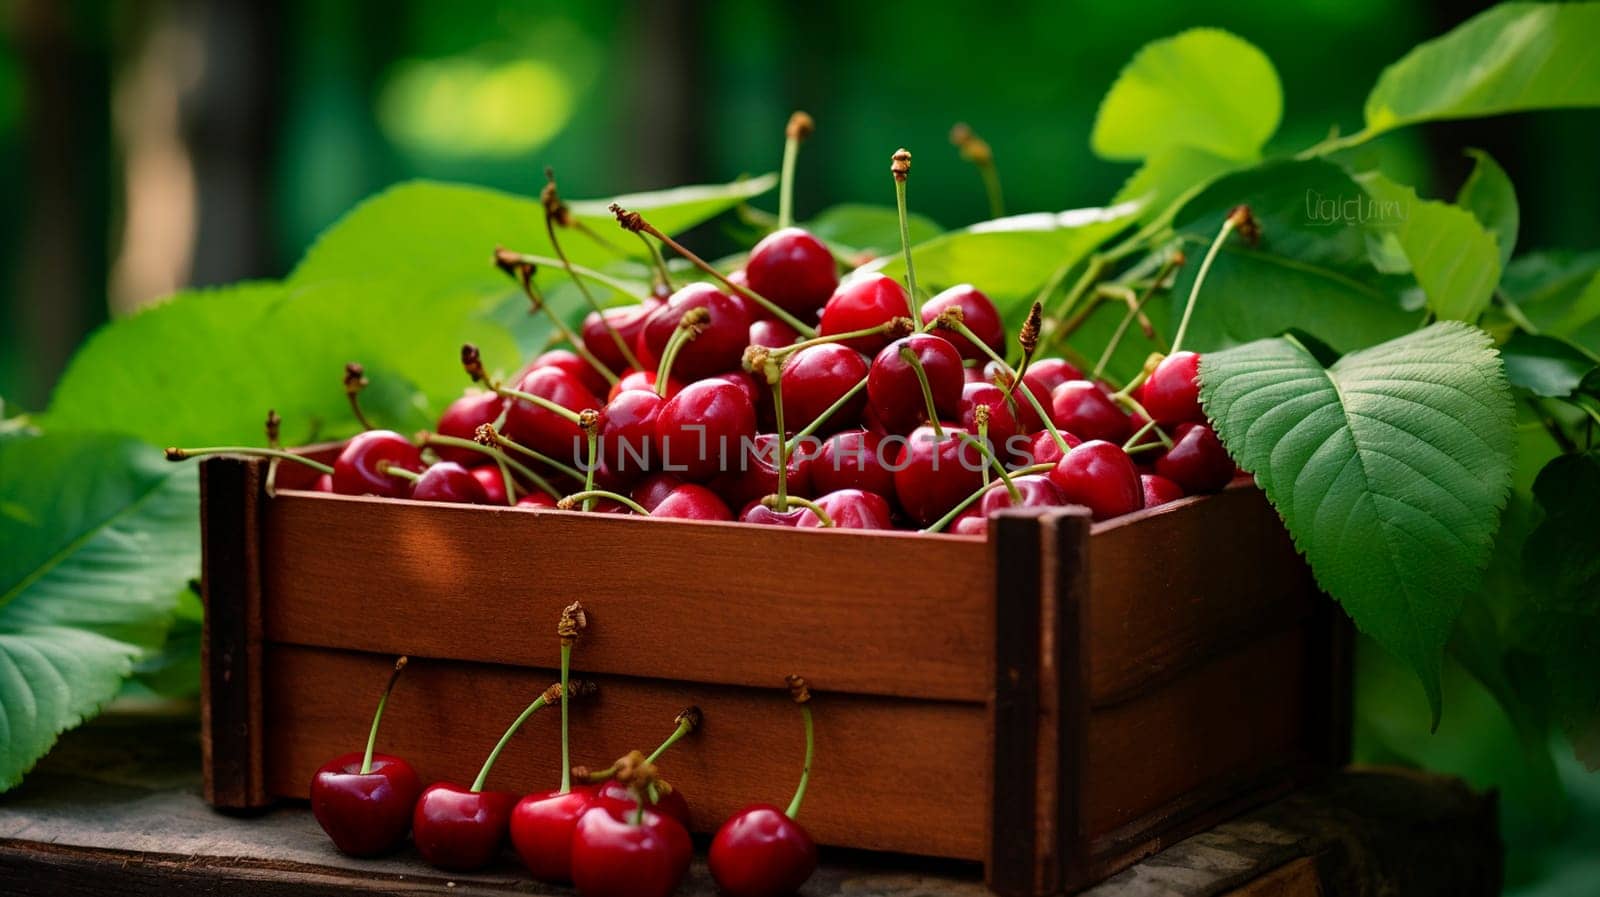 Cherry harvest in a box in the garden. Selective focus. food.